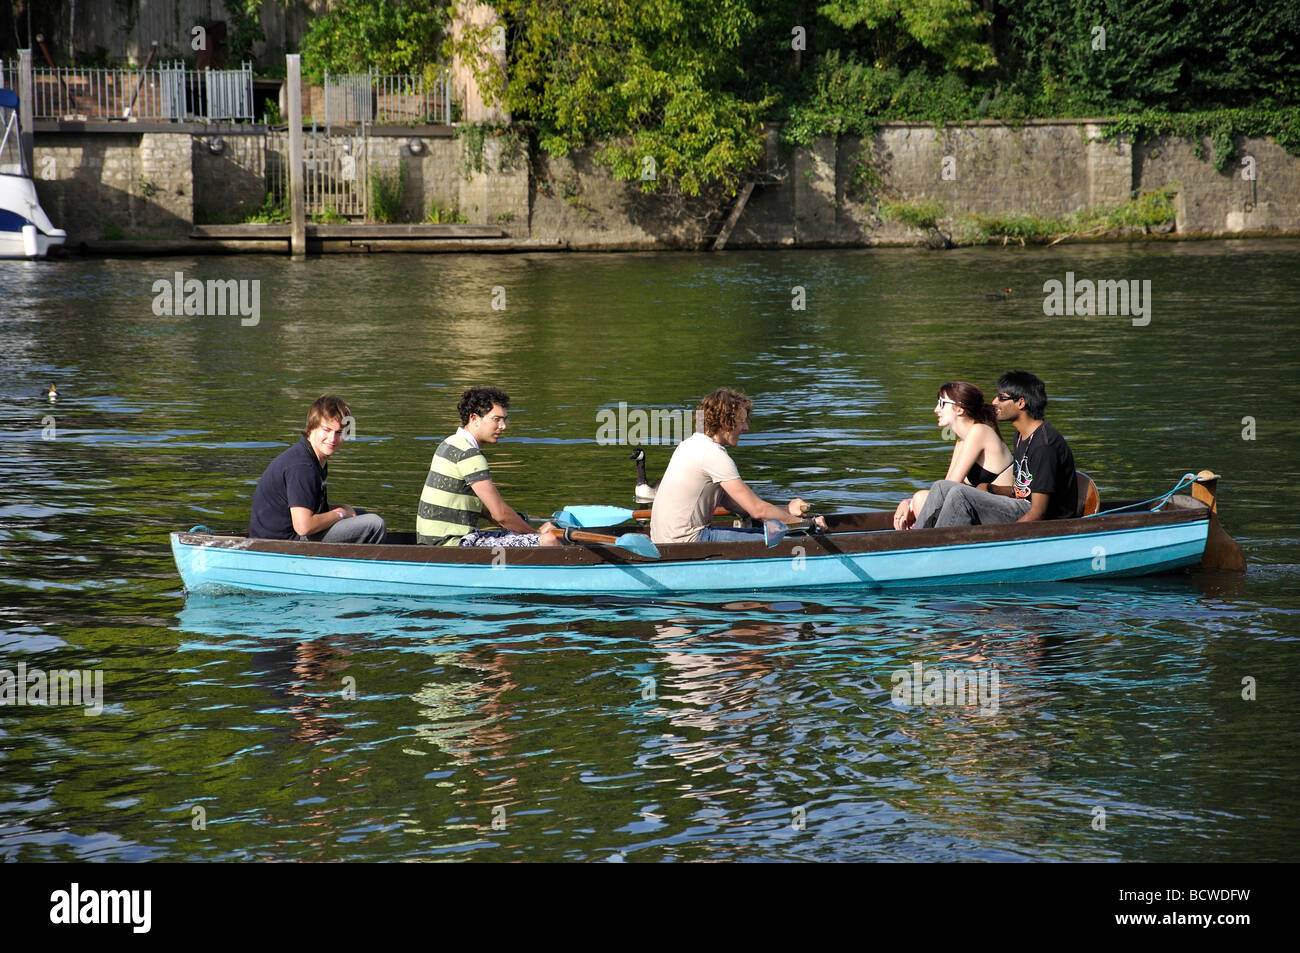 Hire boat on River Thames, East Molesey, Surrey, England, United Kingdom Stock Photo